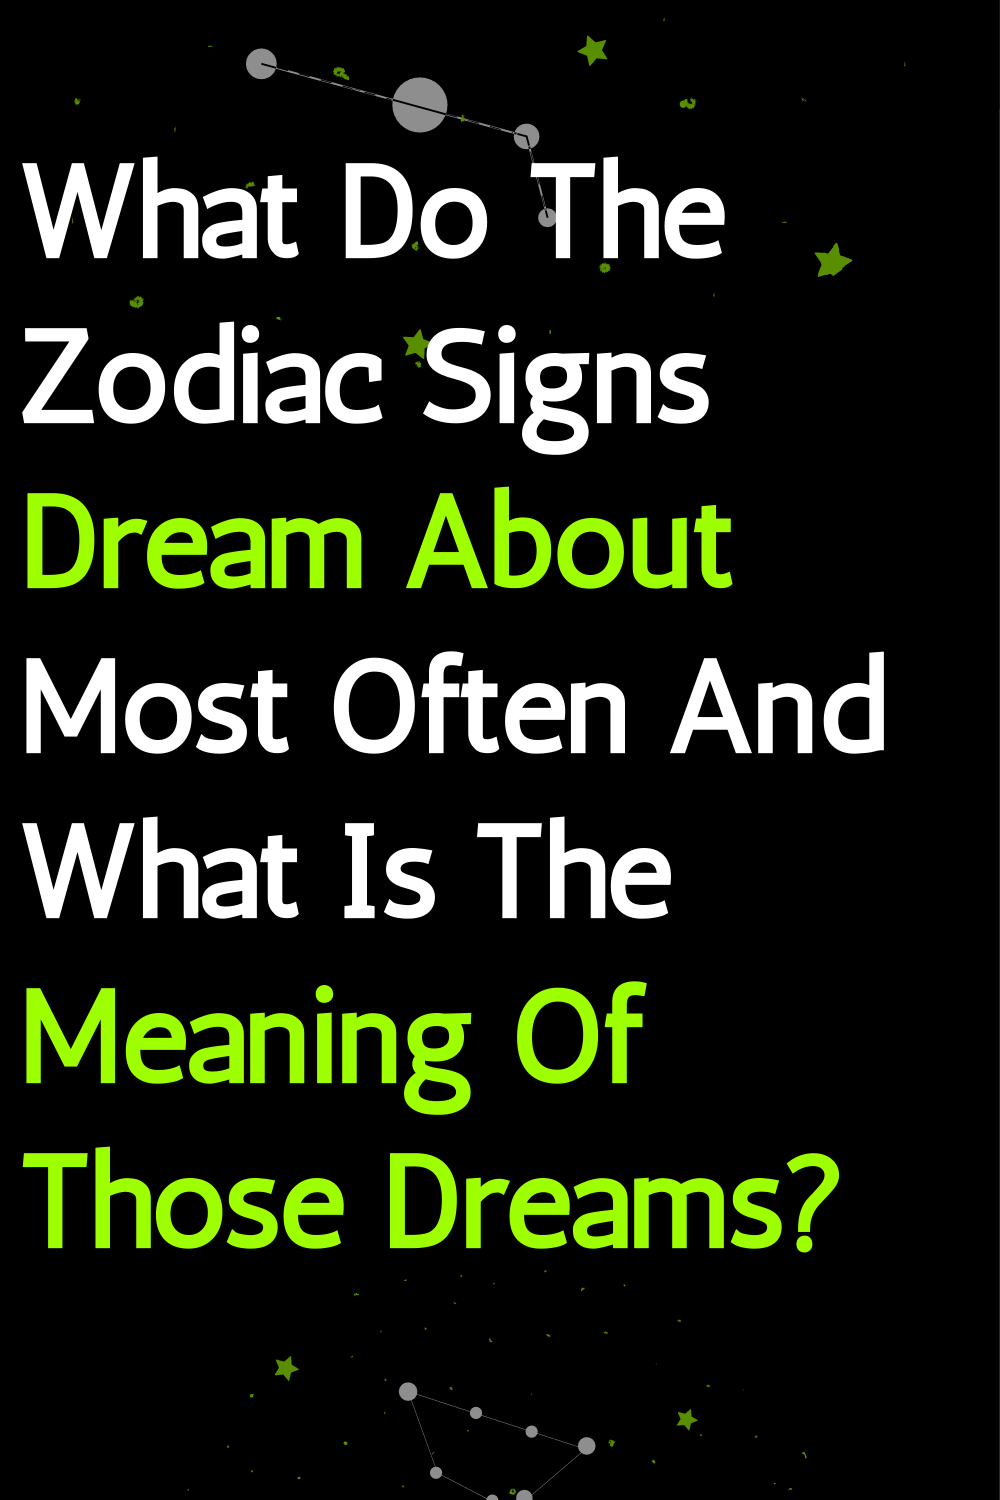 What Do The Zodiac Signs Dream About Most Often And What Is The Meaning Of Those Dreams?